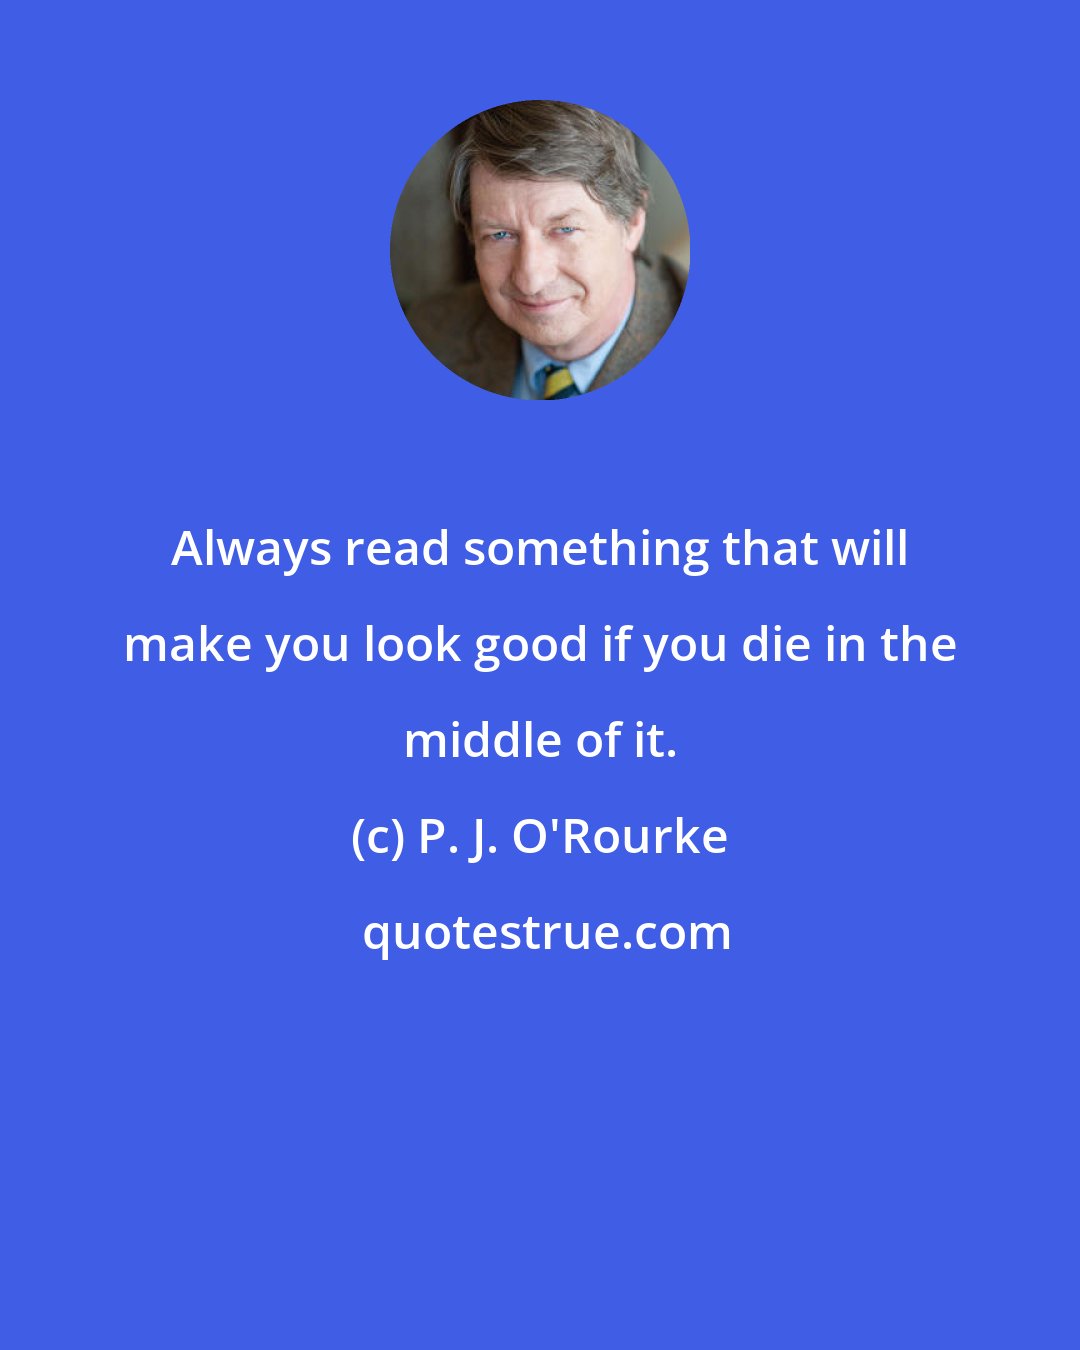 P. J. O'Rourke: Always read something that will make you look good if you die in the middle of it.